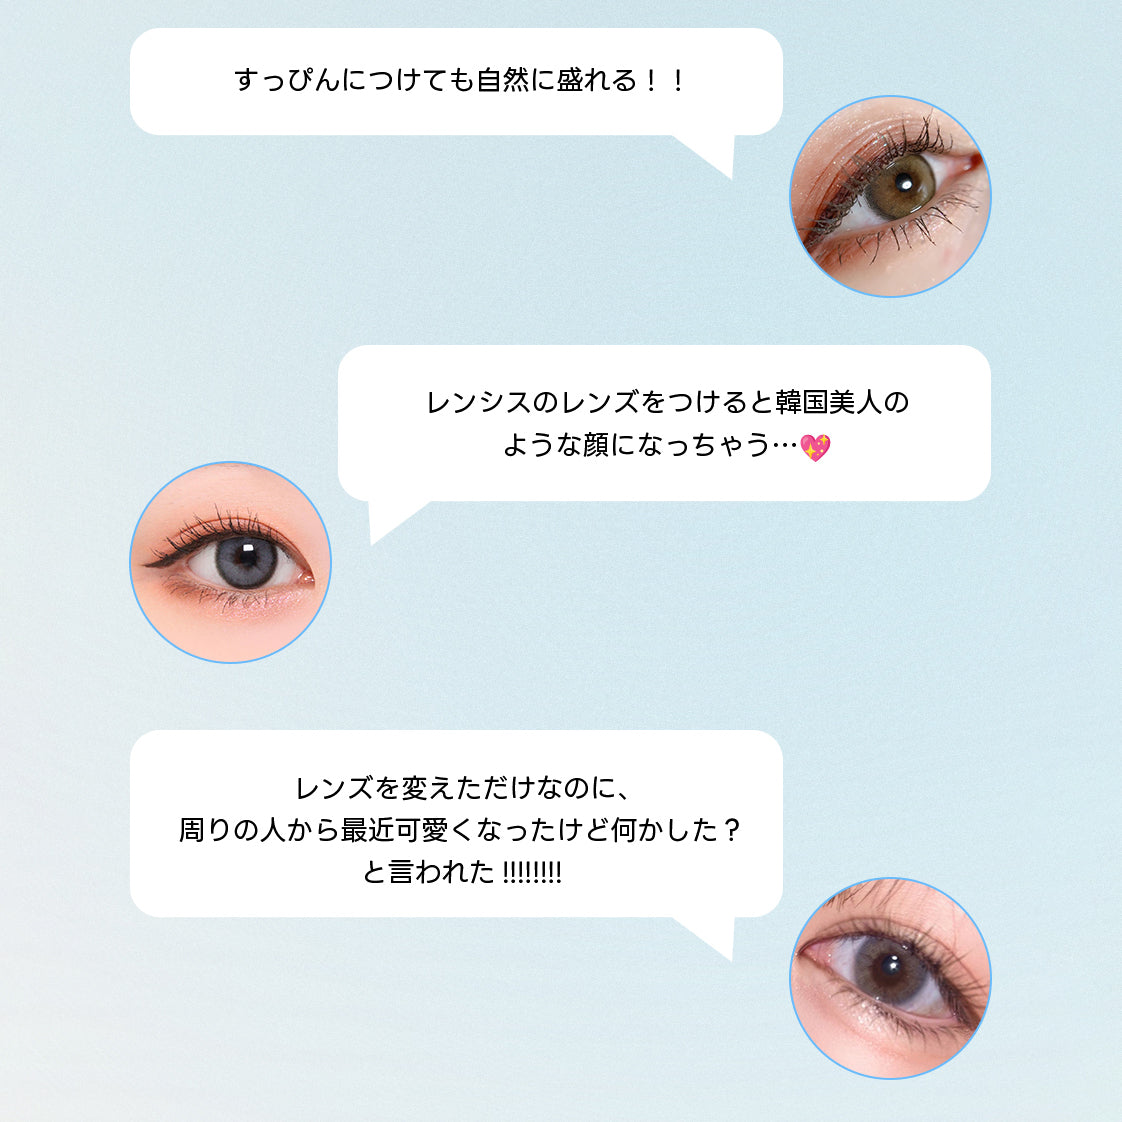 Lenssis 1day KATE BLACK【1箱10枚入り】